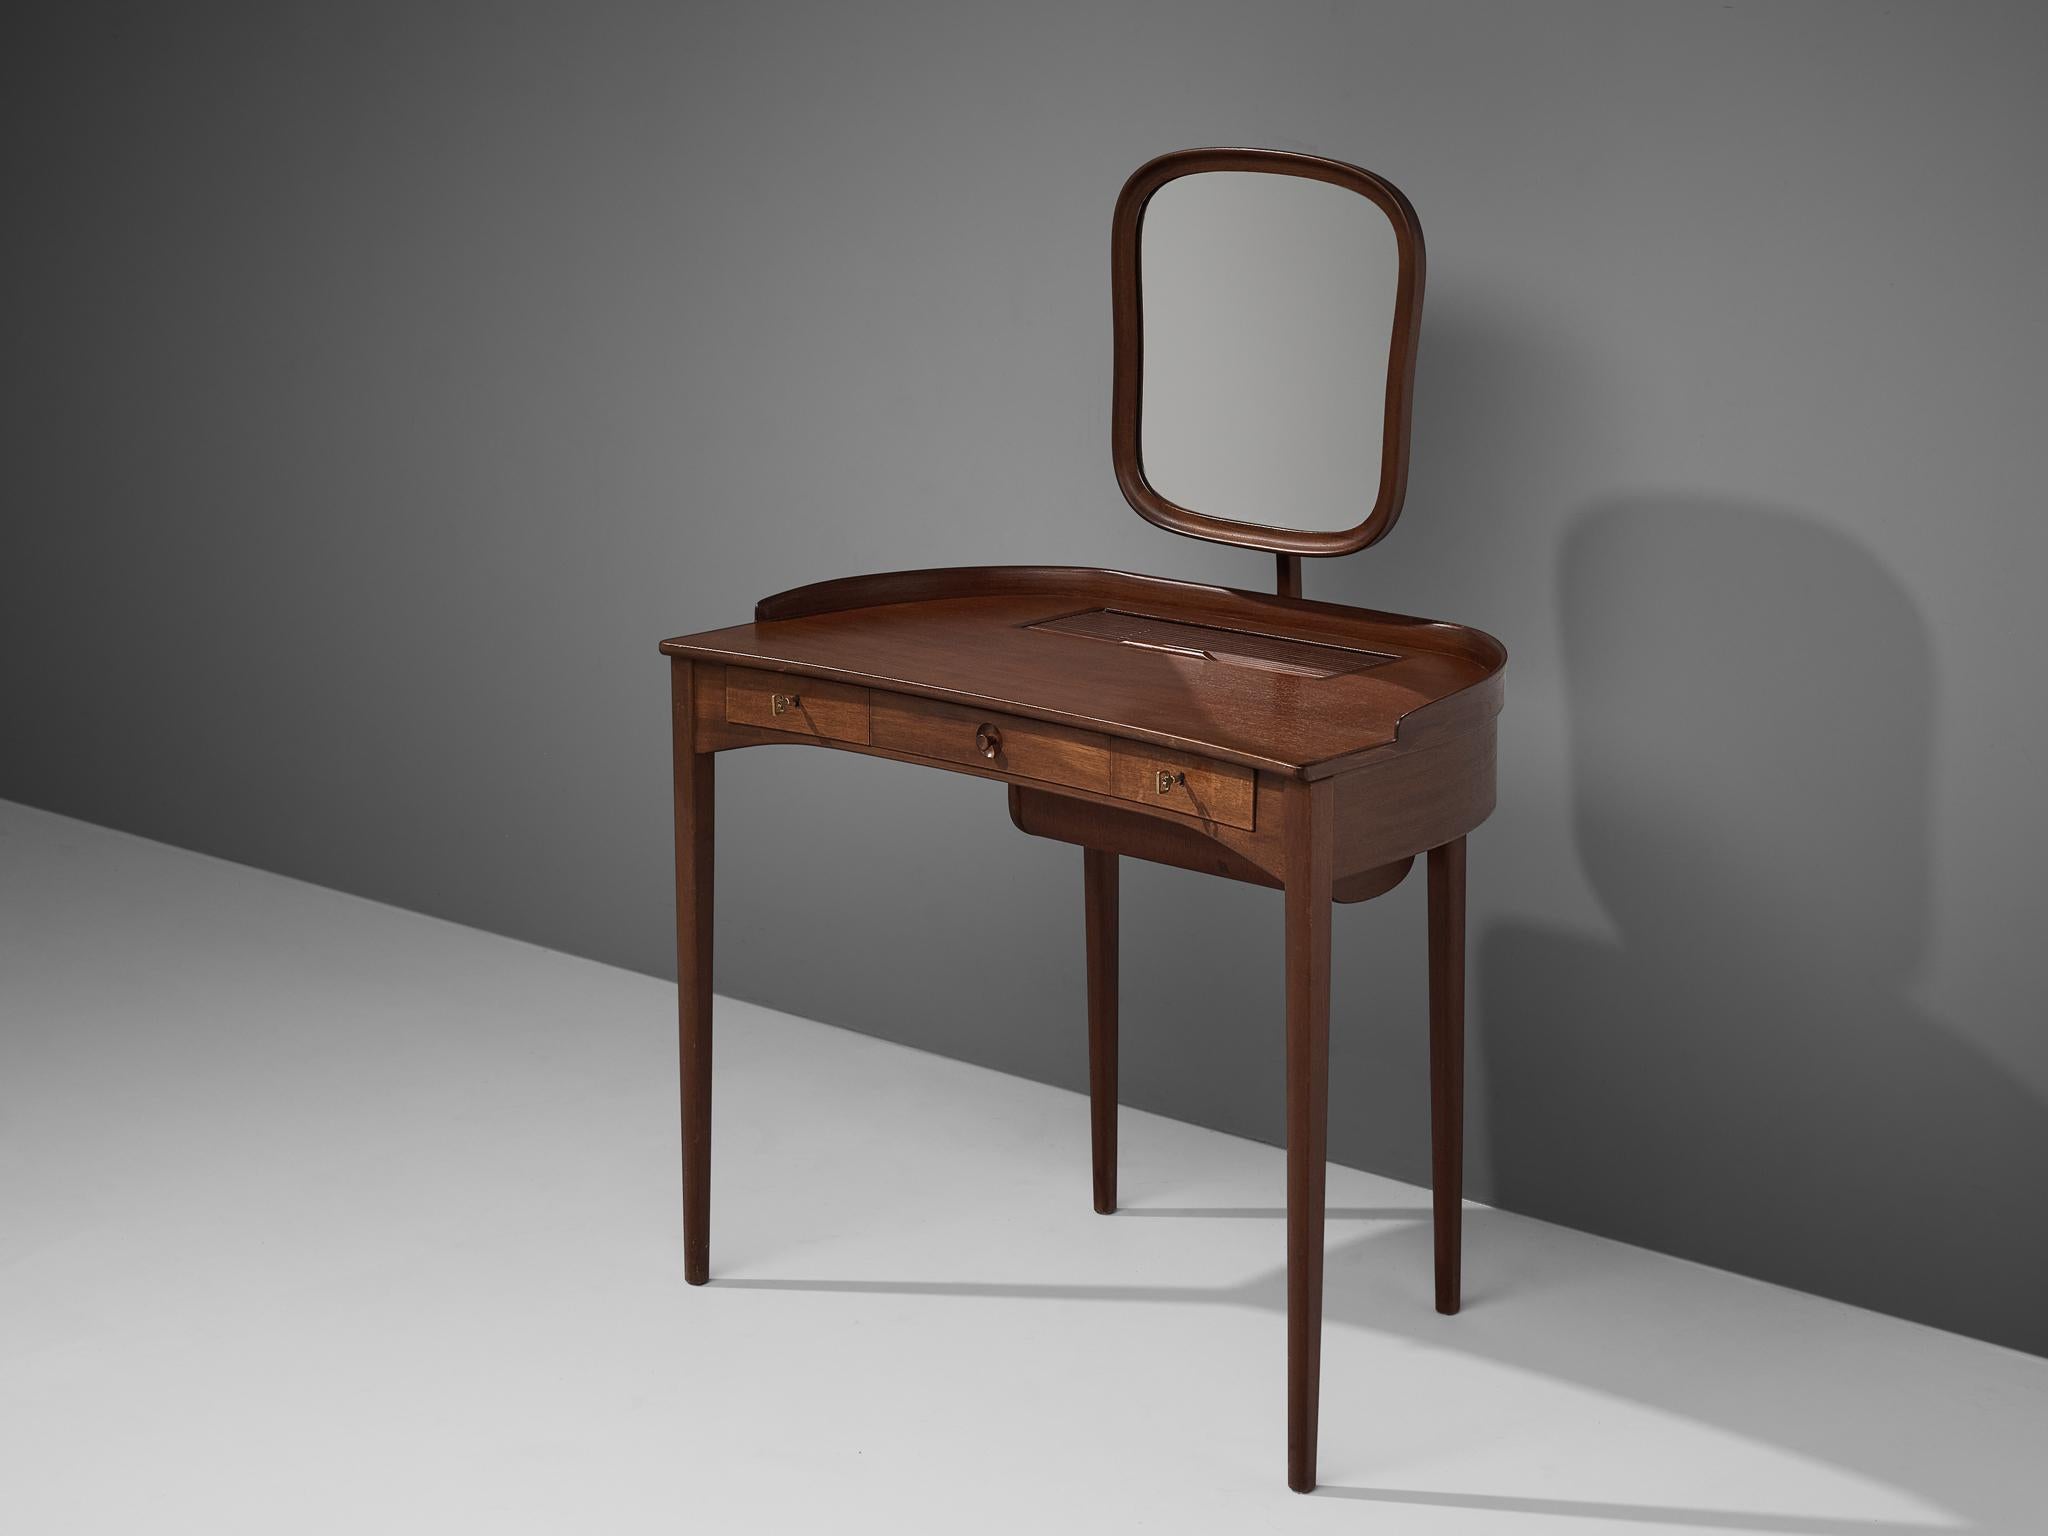 Carl Malmsten for Bodafors, dressing table 'Brigitta', mahogany, glass, Sweden, 1964

The 'Brigitta' dressing table by Swedish designer Carl Malmsten shows an elegant look. A half rounded table features two small lockable drawers and one big